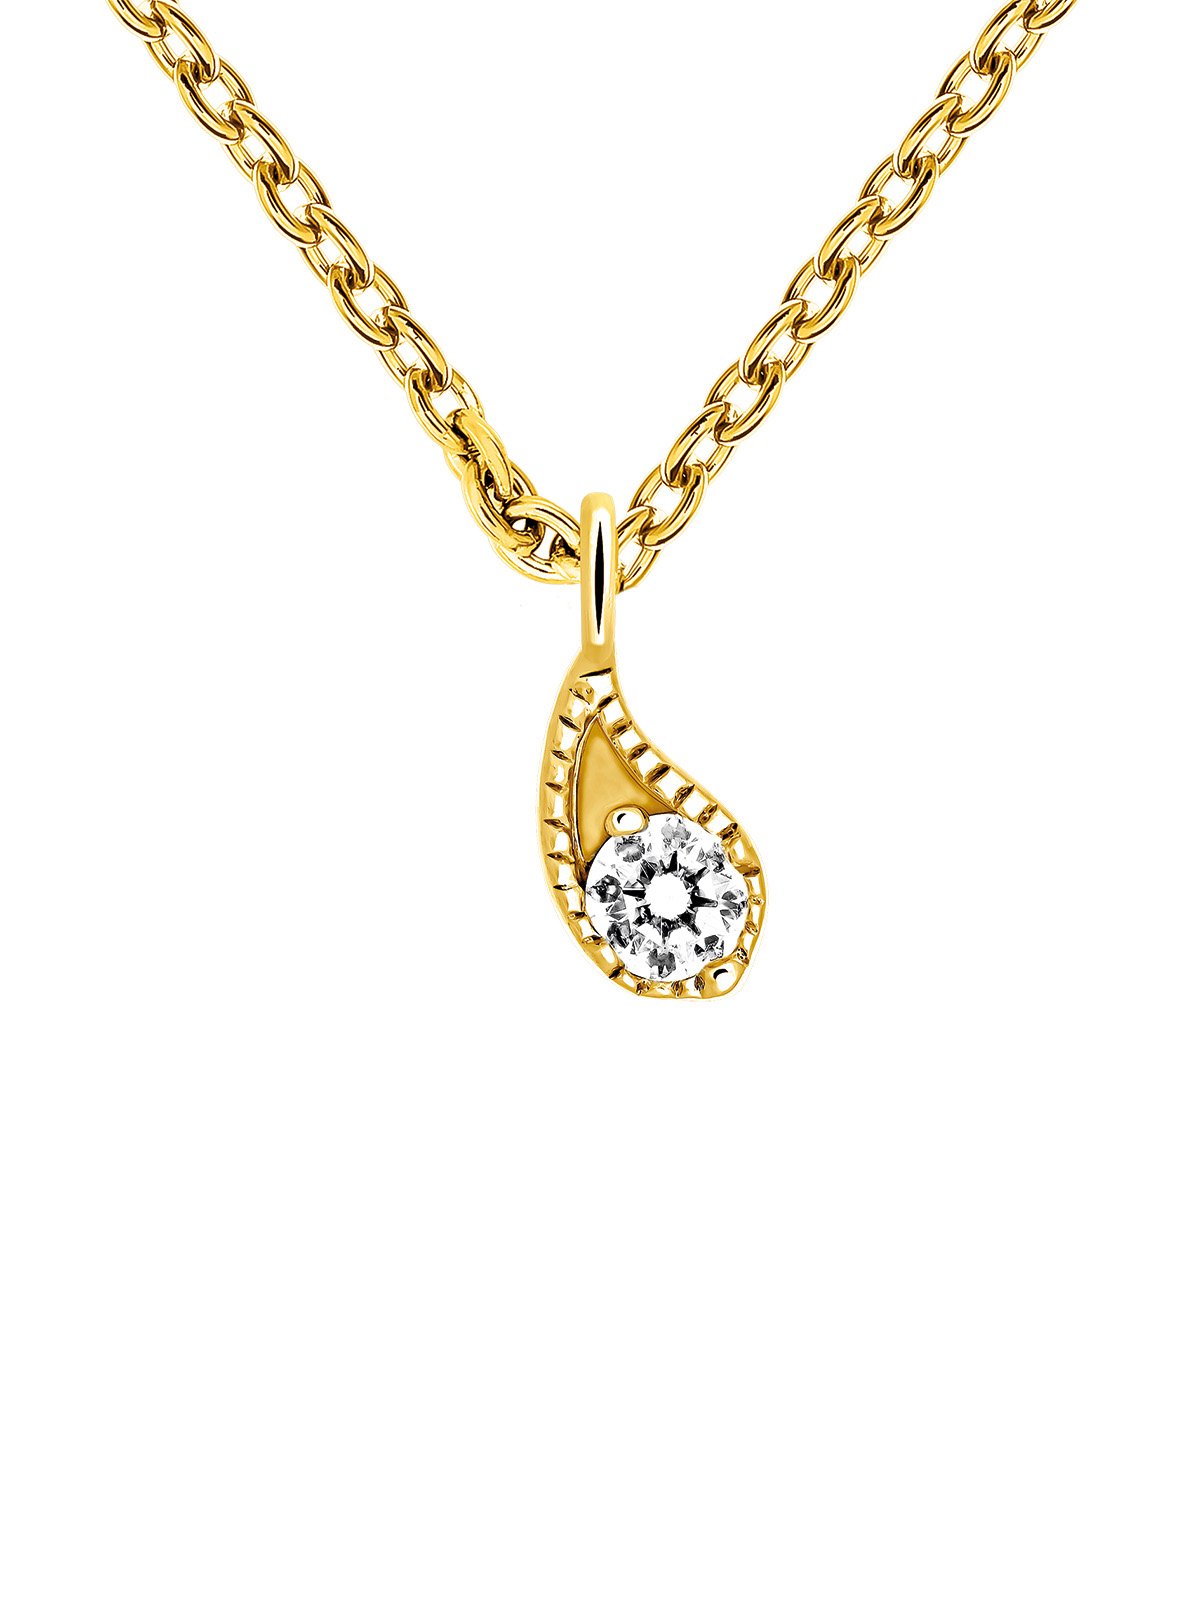 9K Yellow Gold Pendant with Drop and White Diamonds